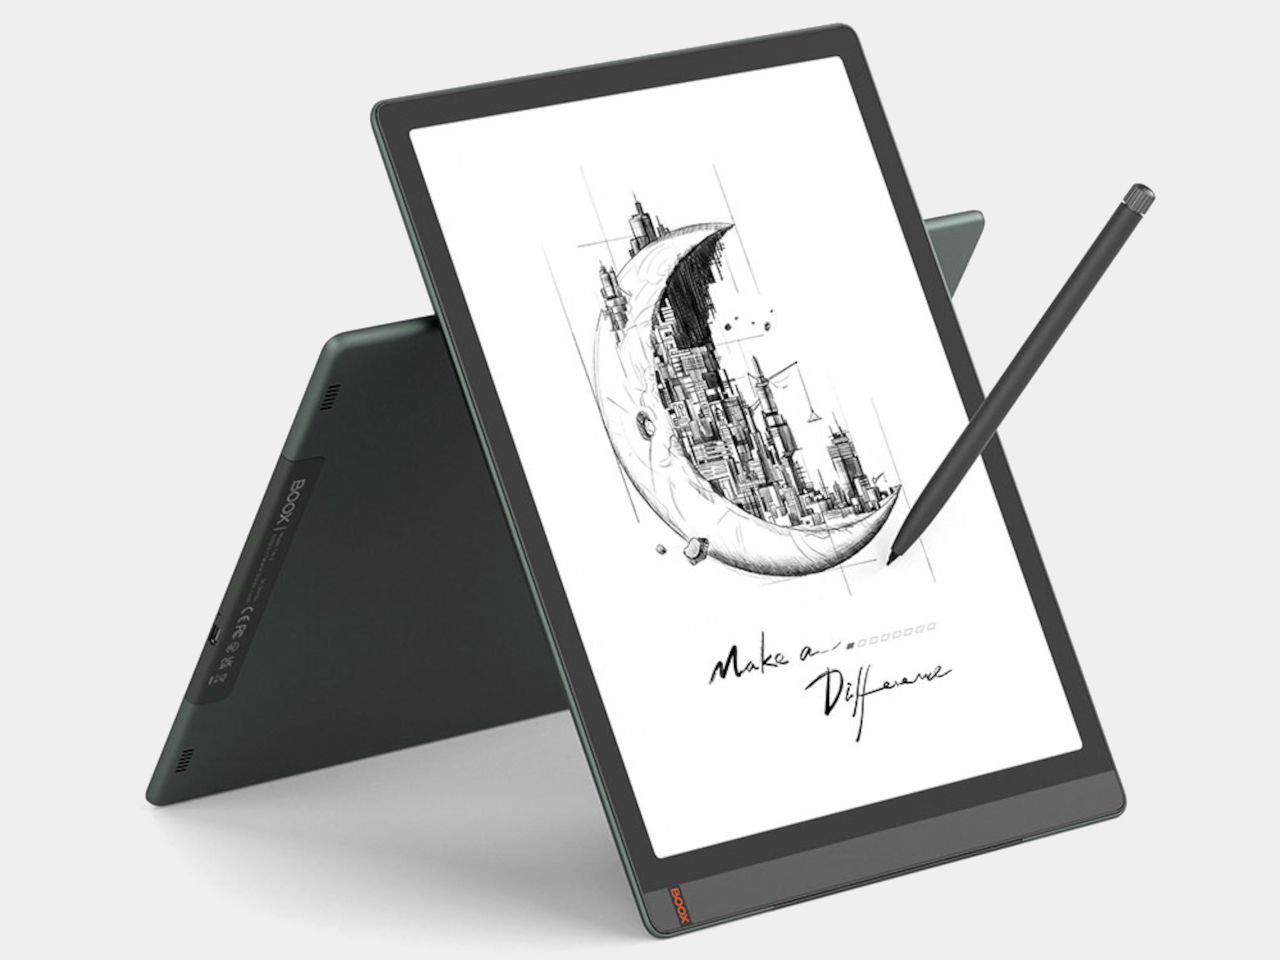 #Onyx BOOX Tab X is an Android tablet with a giant E Ink screen